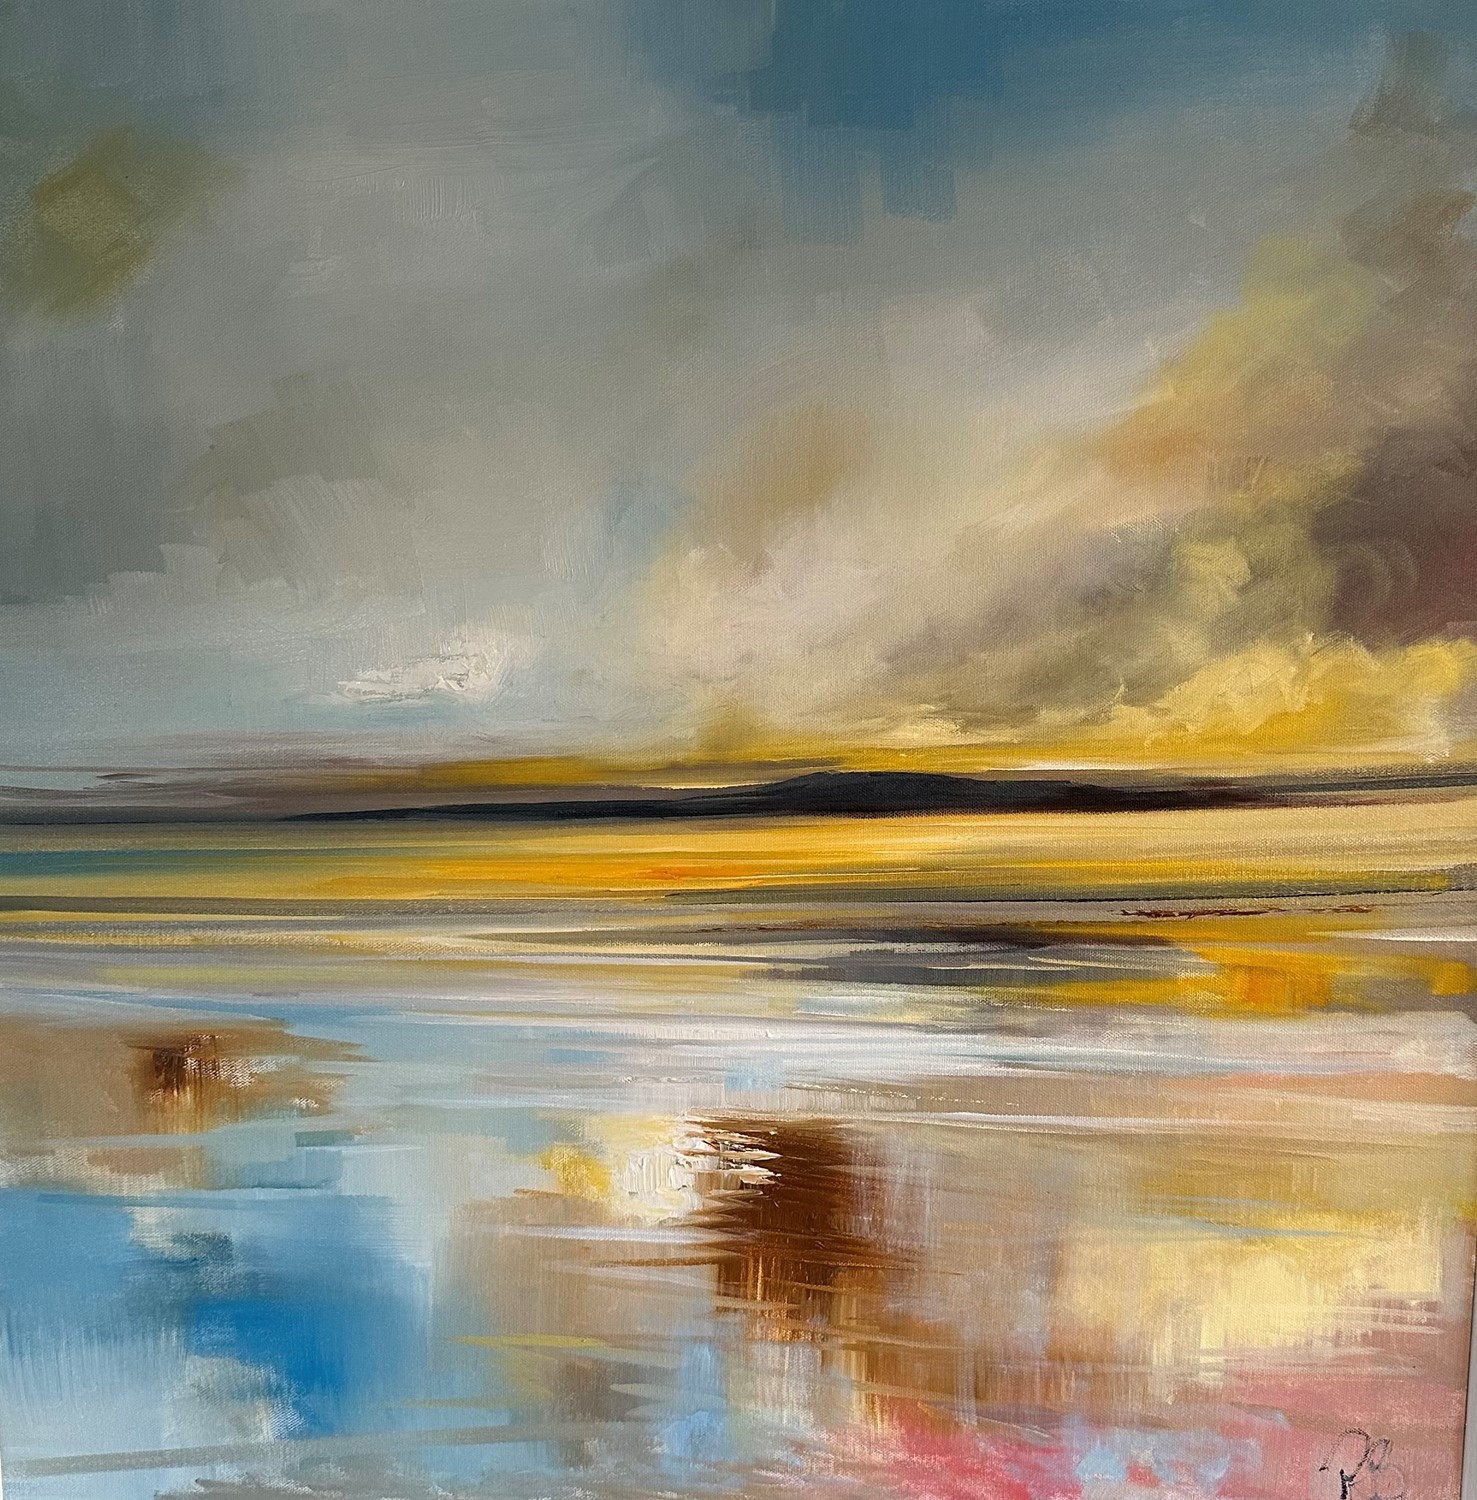 'Reflections looking out to the Summer Isles' by artist Rosanne Barr